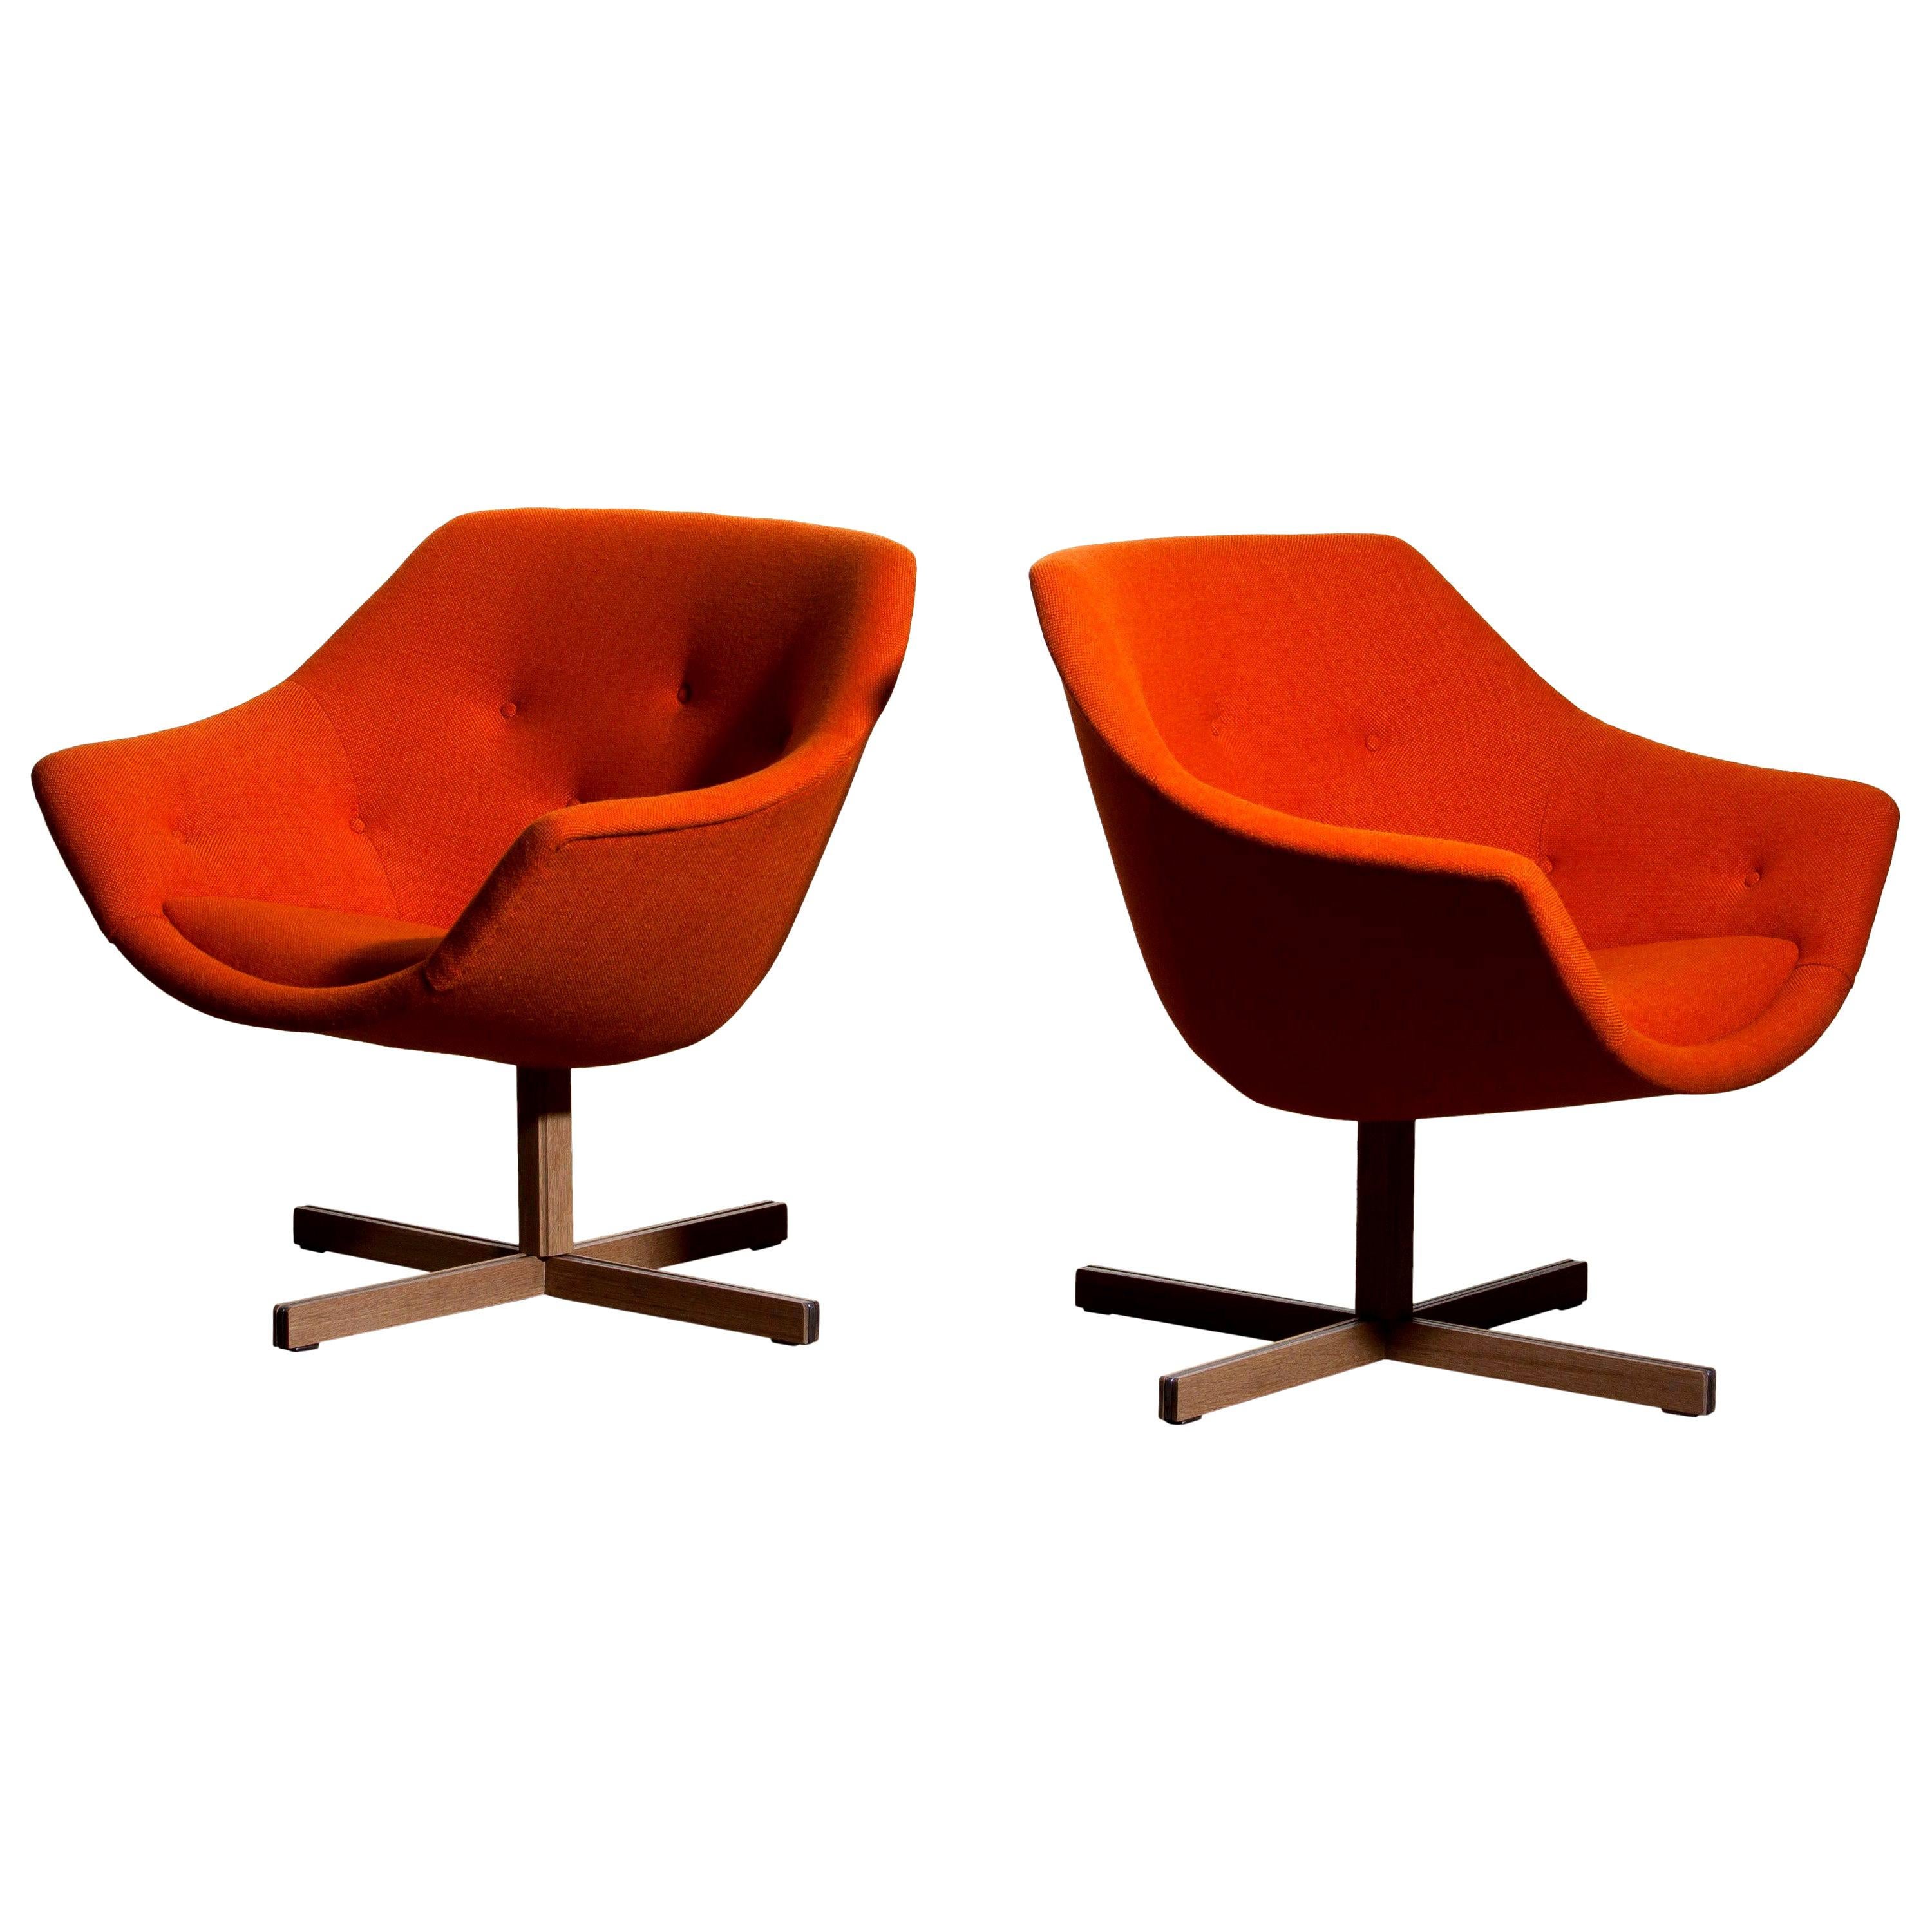 Fantastic pair of 'Mandarini' swivel armchairs made by Carl Gustaf Hiort for Puunveisto Oy, wood work Ltd.
These chairs are upholstered with a buttoned orange fabric 'Hallingdal' by Kvadrat designed by Nanna Ditzel, on an oak swivel base.
They are